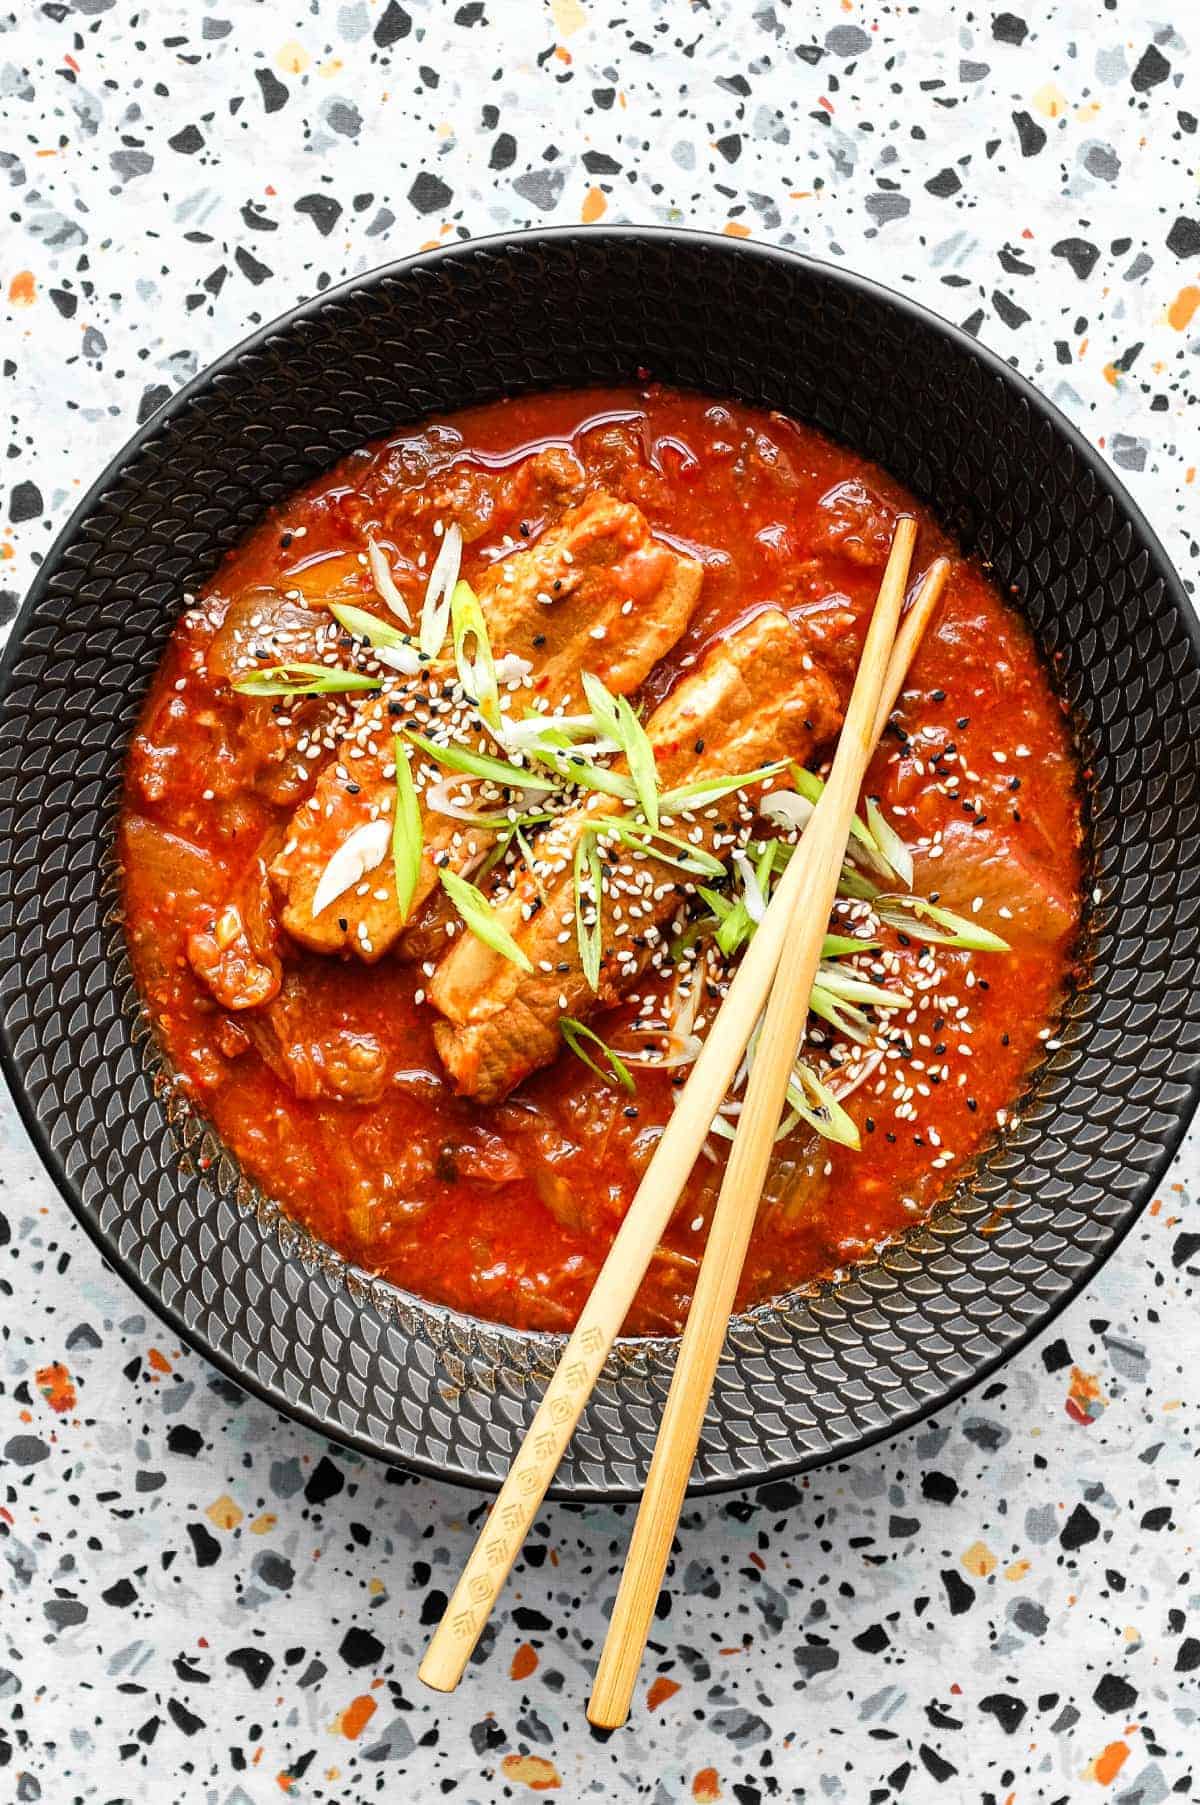 A tantalizing bowl of stew featuring succulent pork belly, enjoyed with chopsticks.